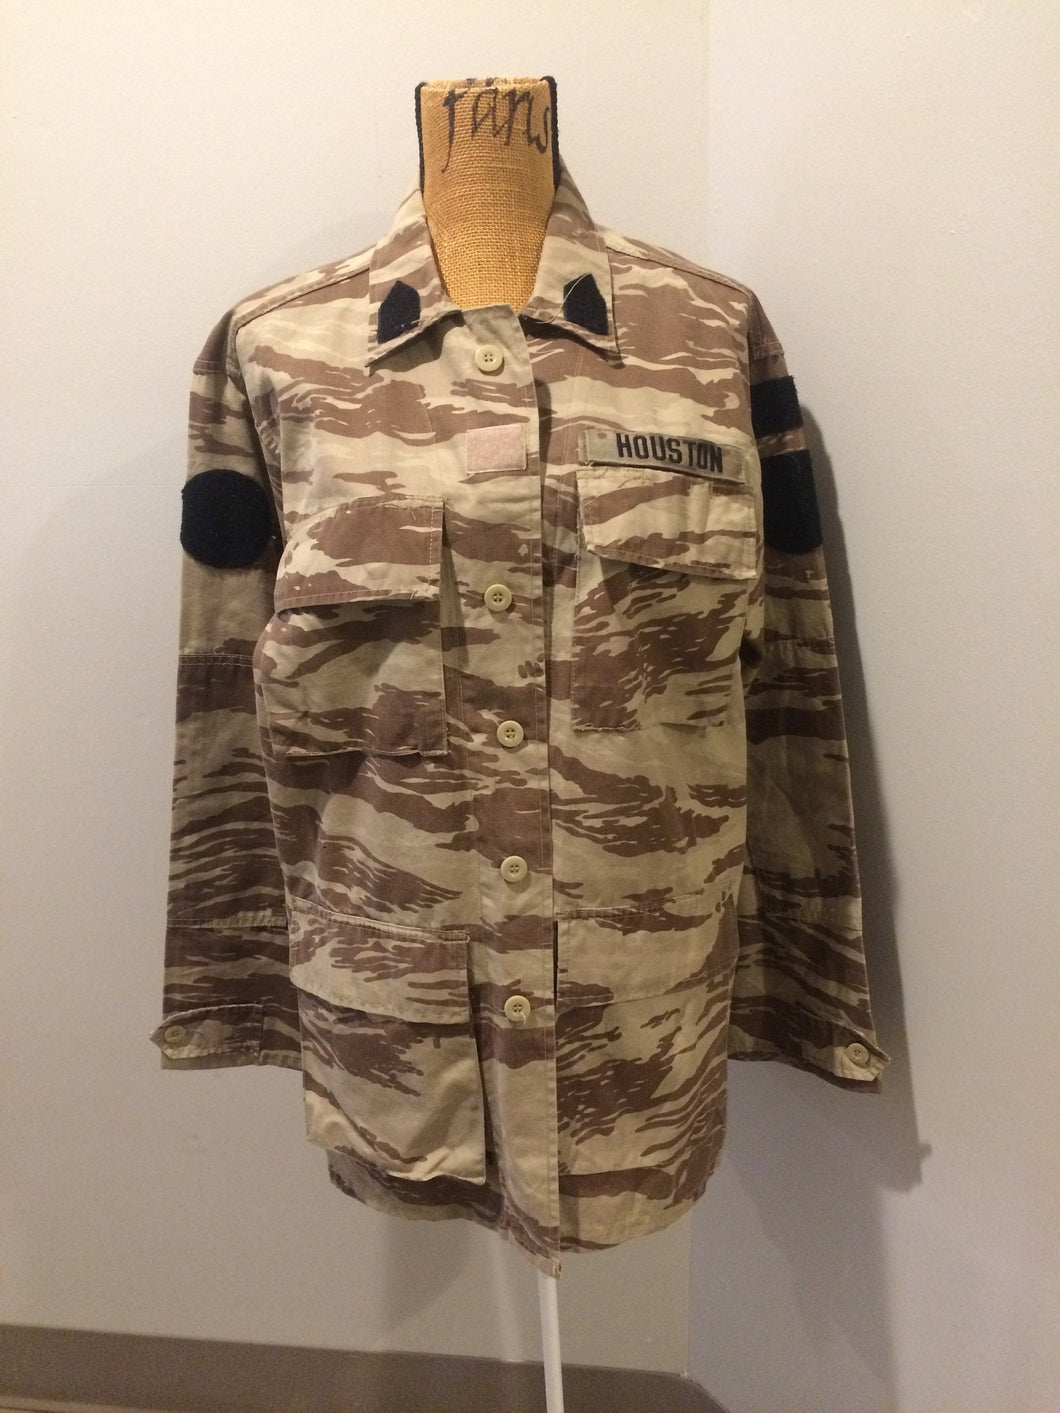 Kingspier Vintage - This desert camouflage light military jacket is in great condition. Made of cotton with 4 large cargo pockets, velcro rank patches, and 